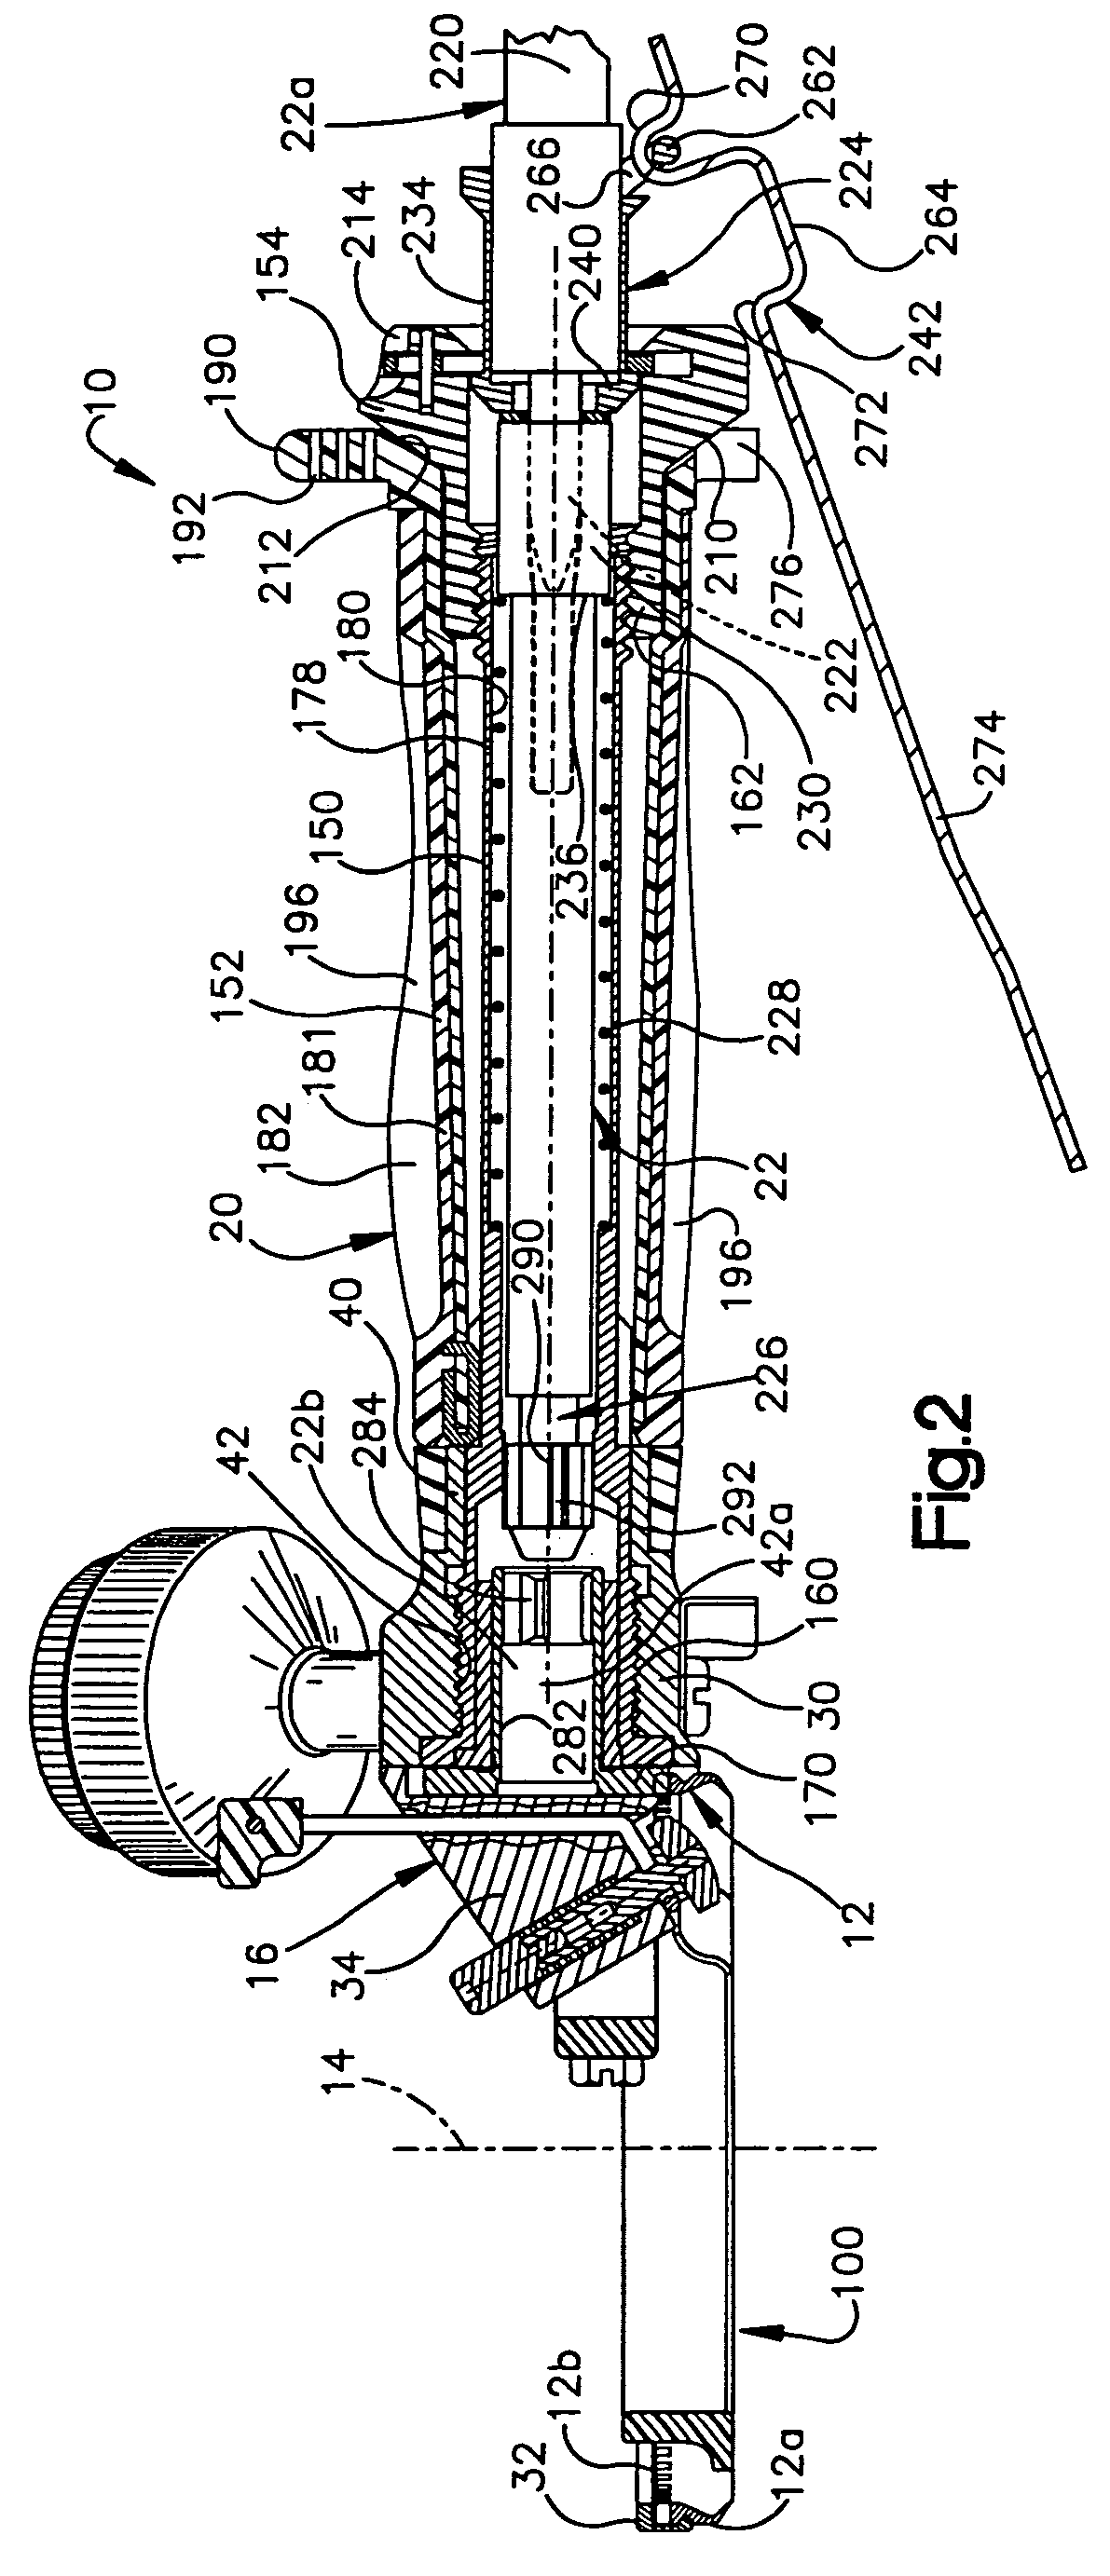 Power operated rotary knife